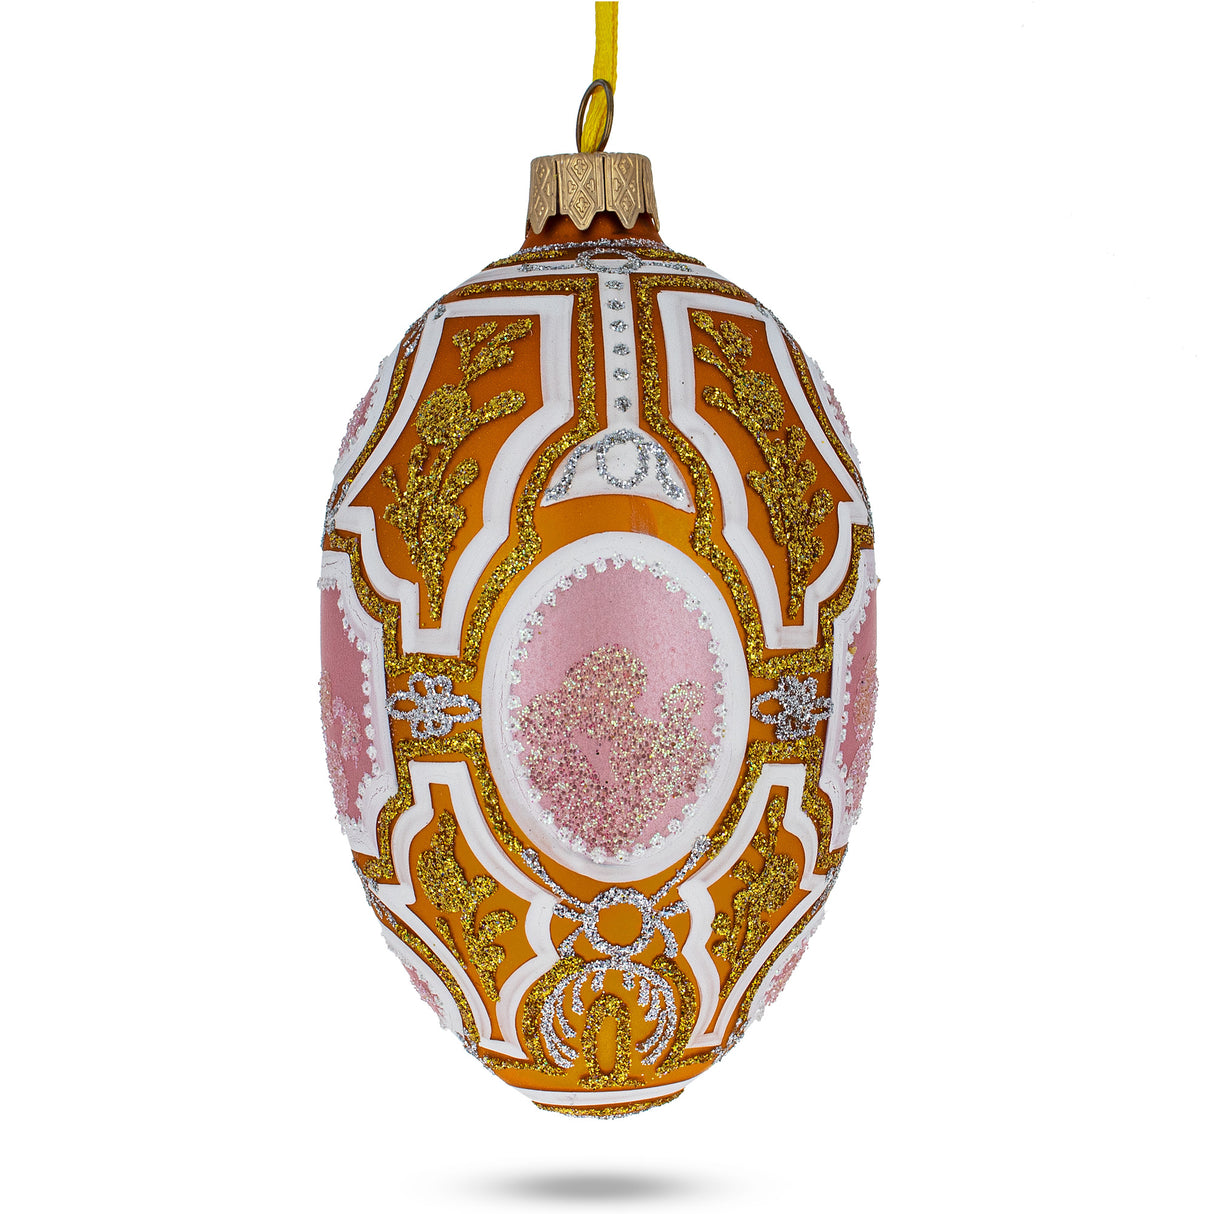 Glass 1914 Catherine the Great Royal Glass Egg Ornament 4 Inches in Gold color Oval